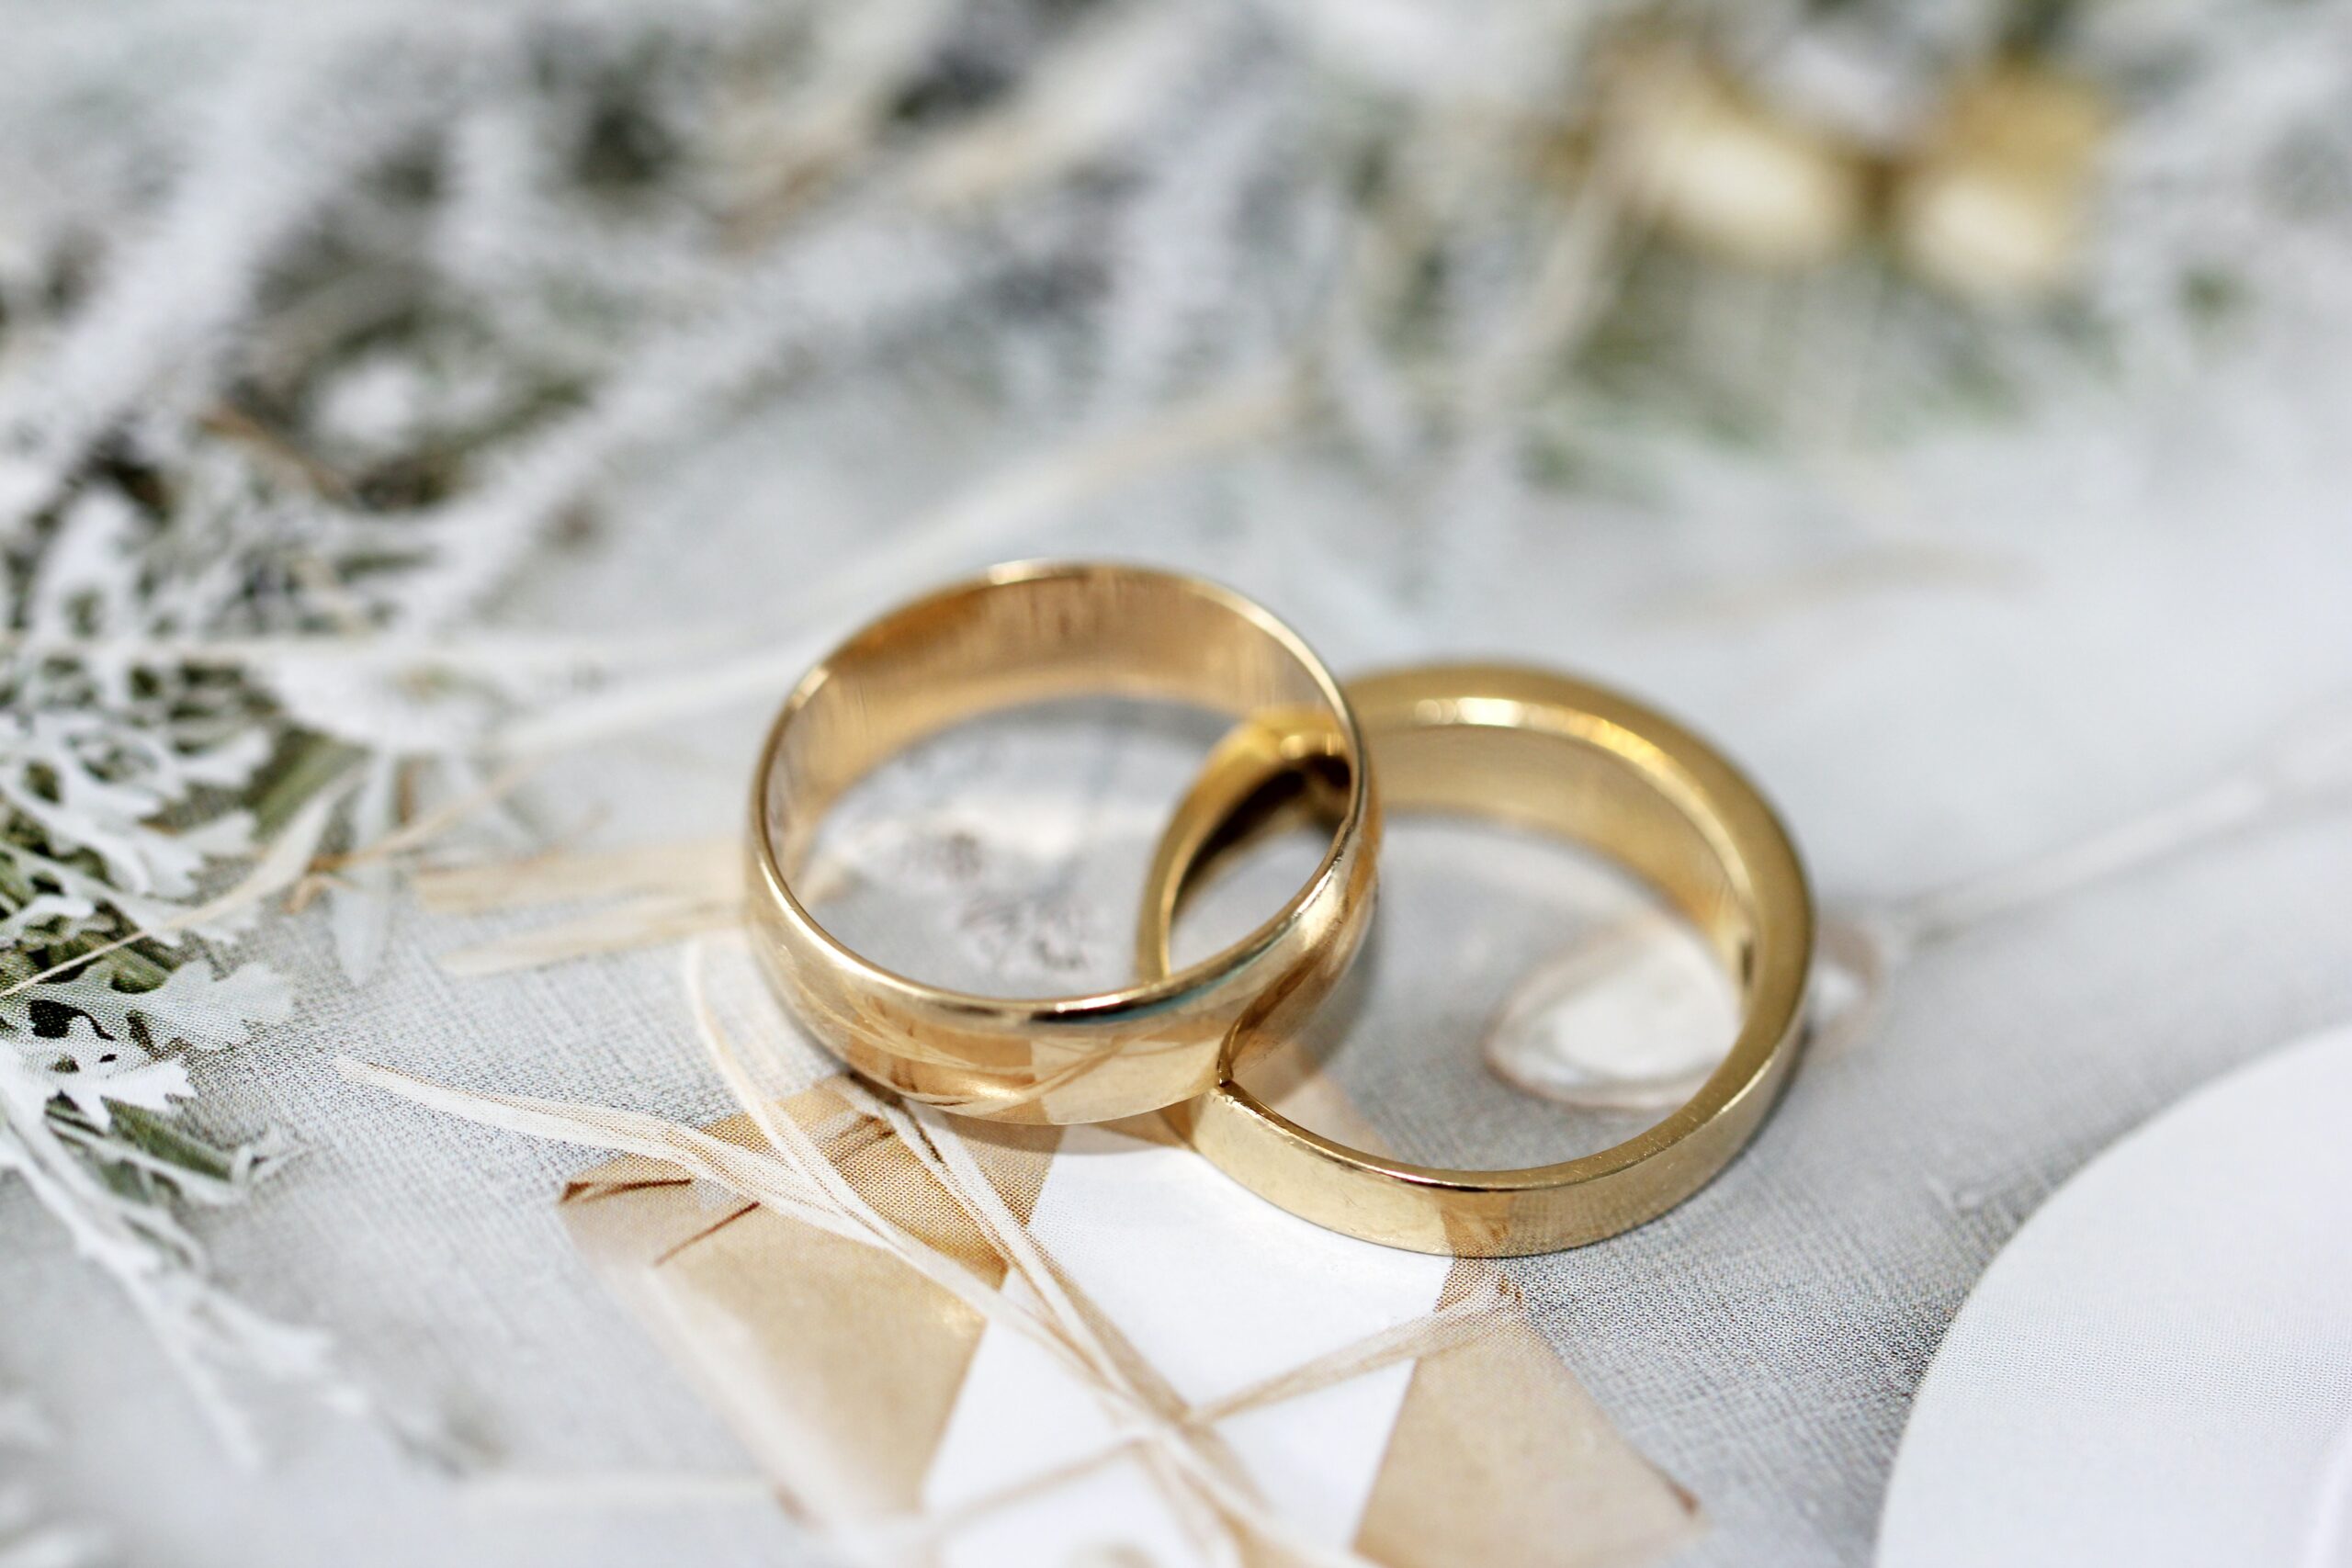 Cultural Expectations That Can Affect Your Wedding Plans